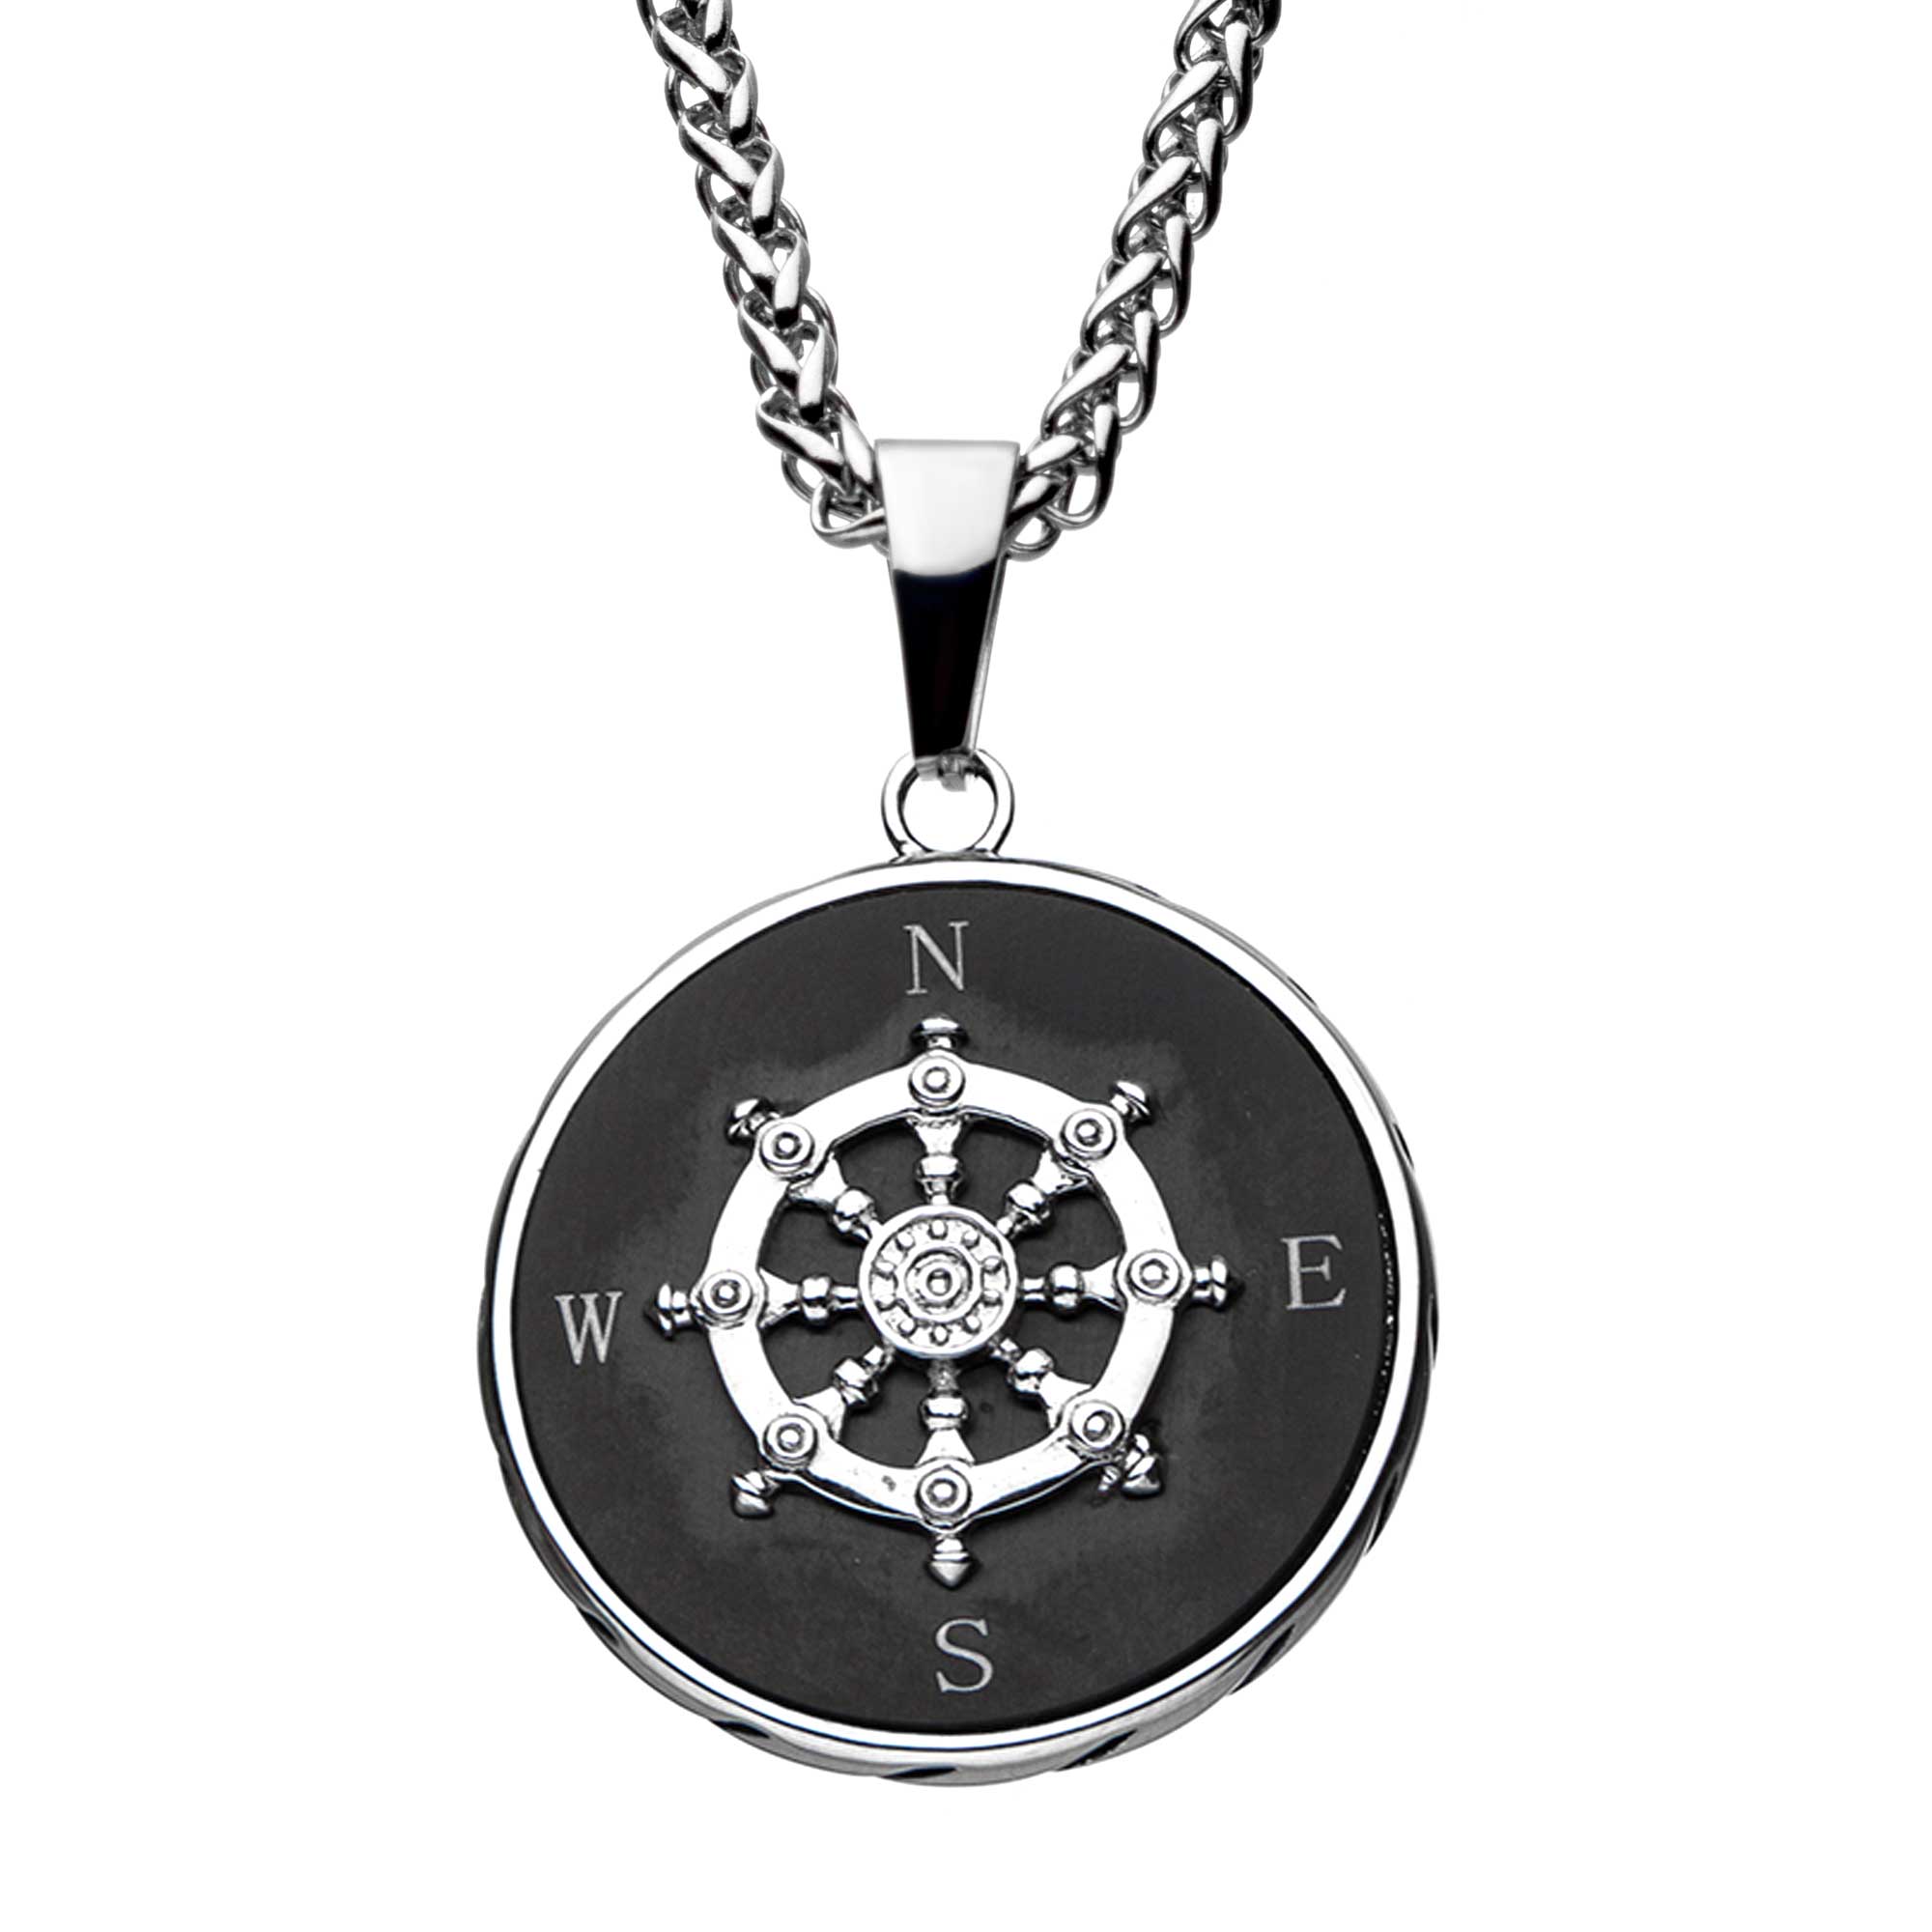 Stainless Steel Black Plated Ship's Wheel Compass Pendant with Chain Thurber's Fine Jewelry Wadsworth, OH